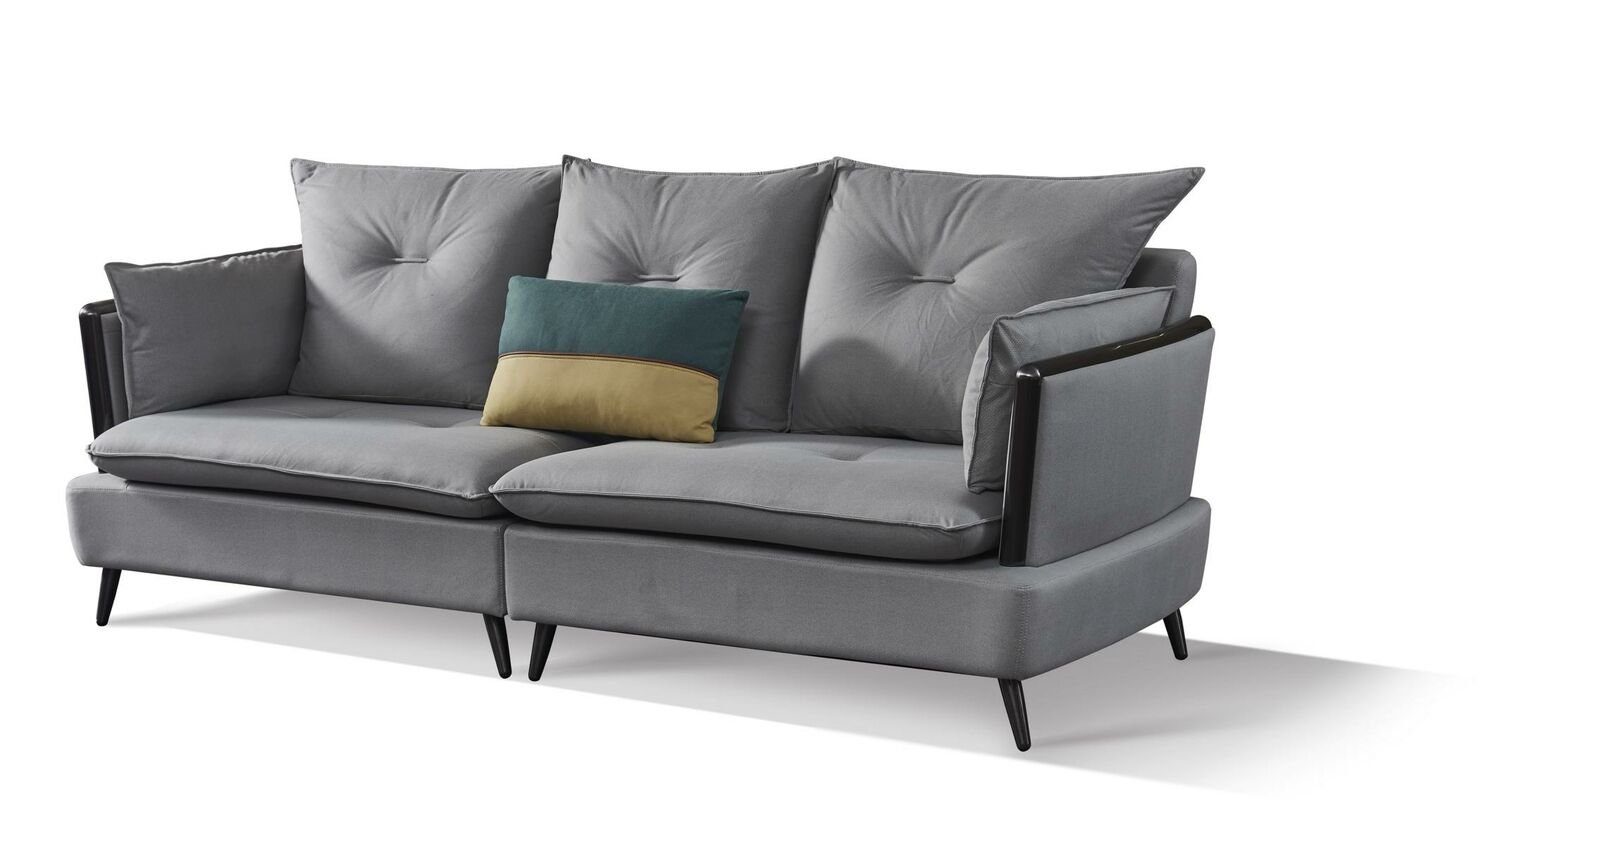 Sitzer 3 Textil Sofa in Couchen, Sofa Moderne Couch Europe Sofas JVmoebel Polster Made